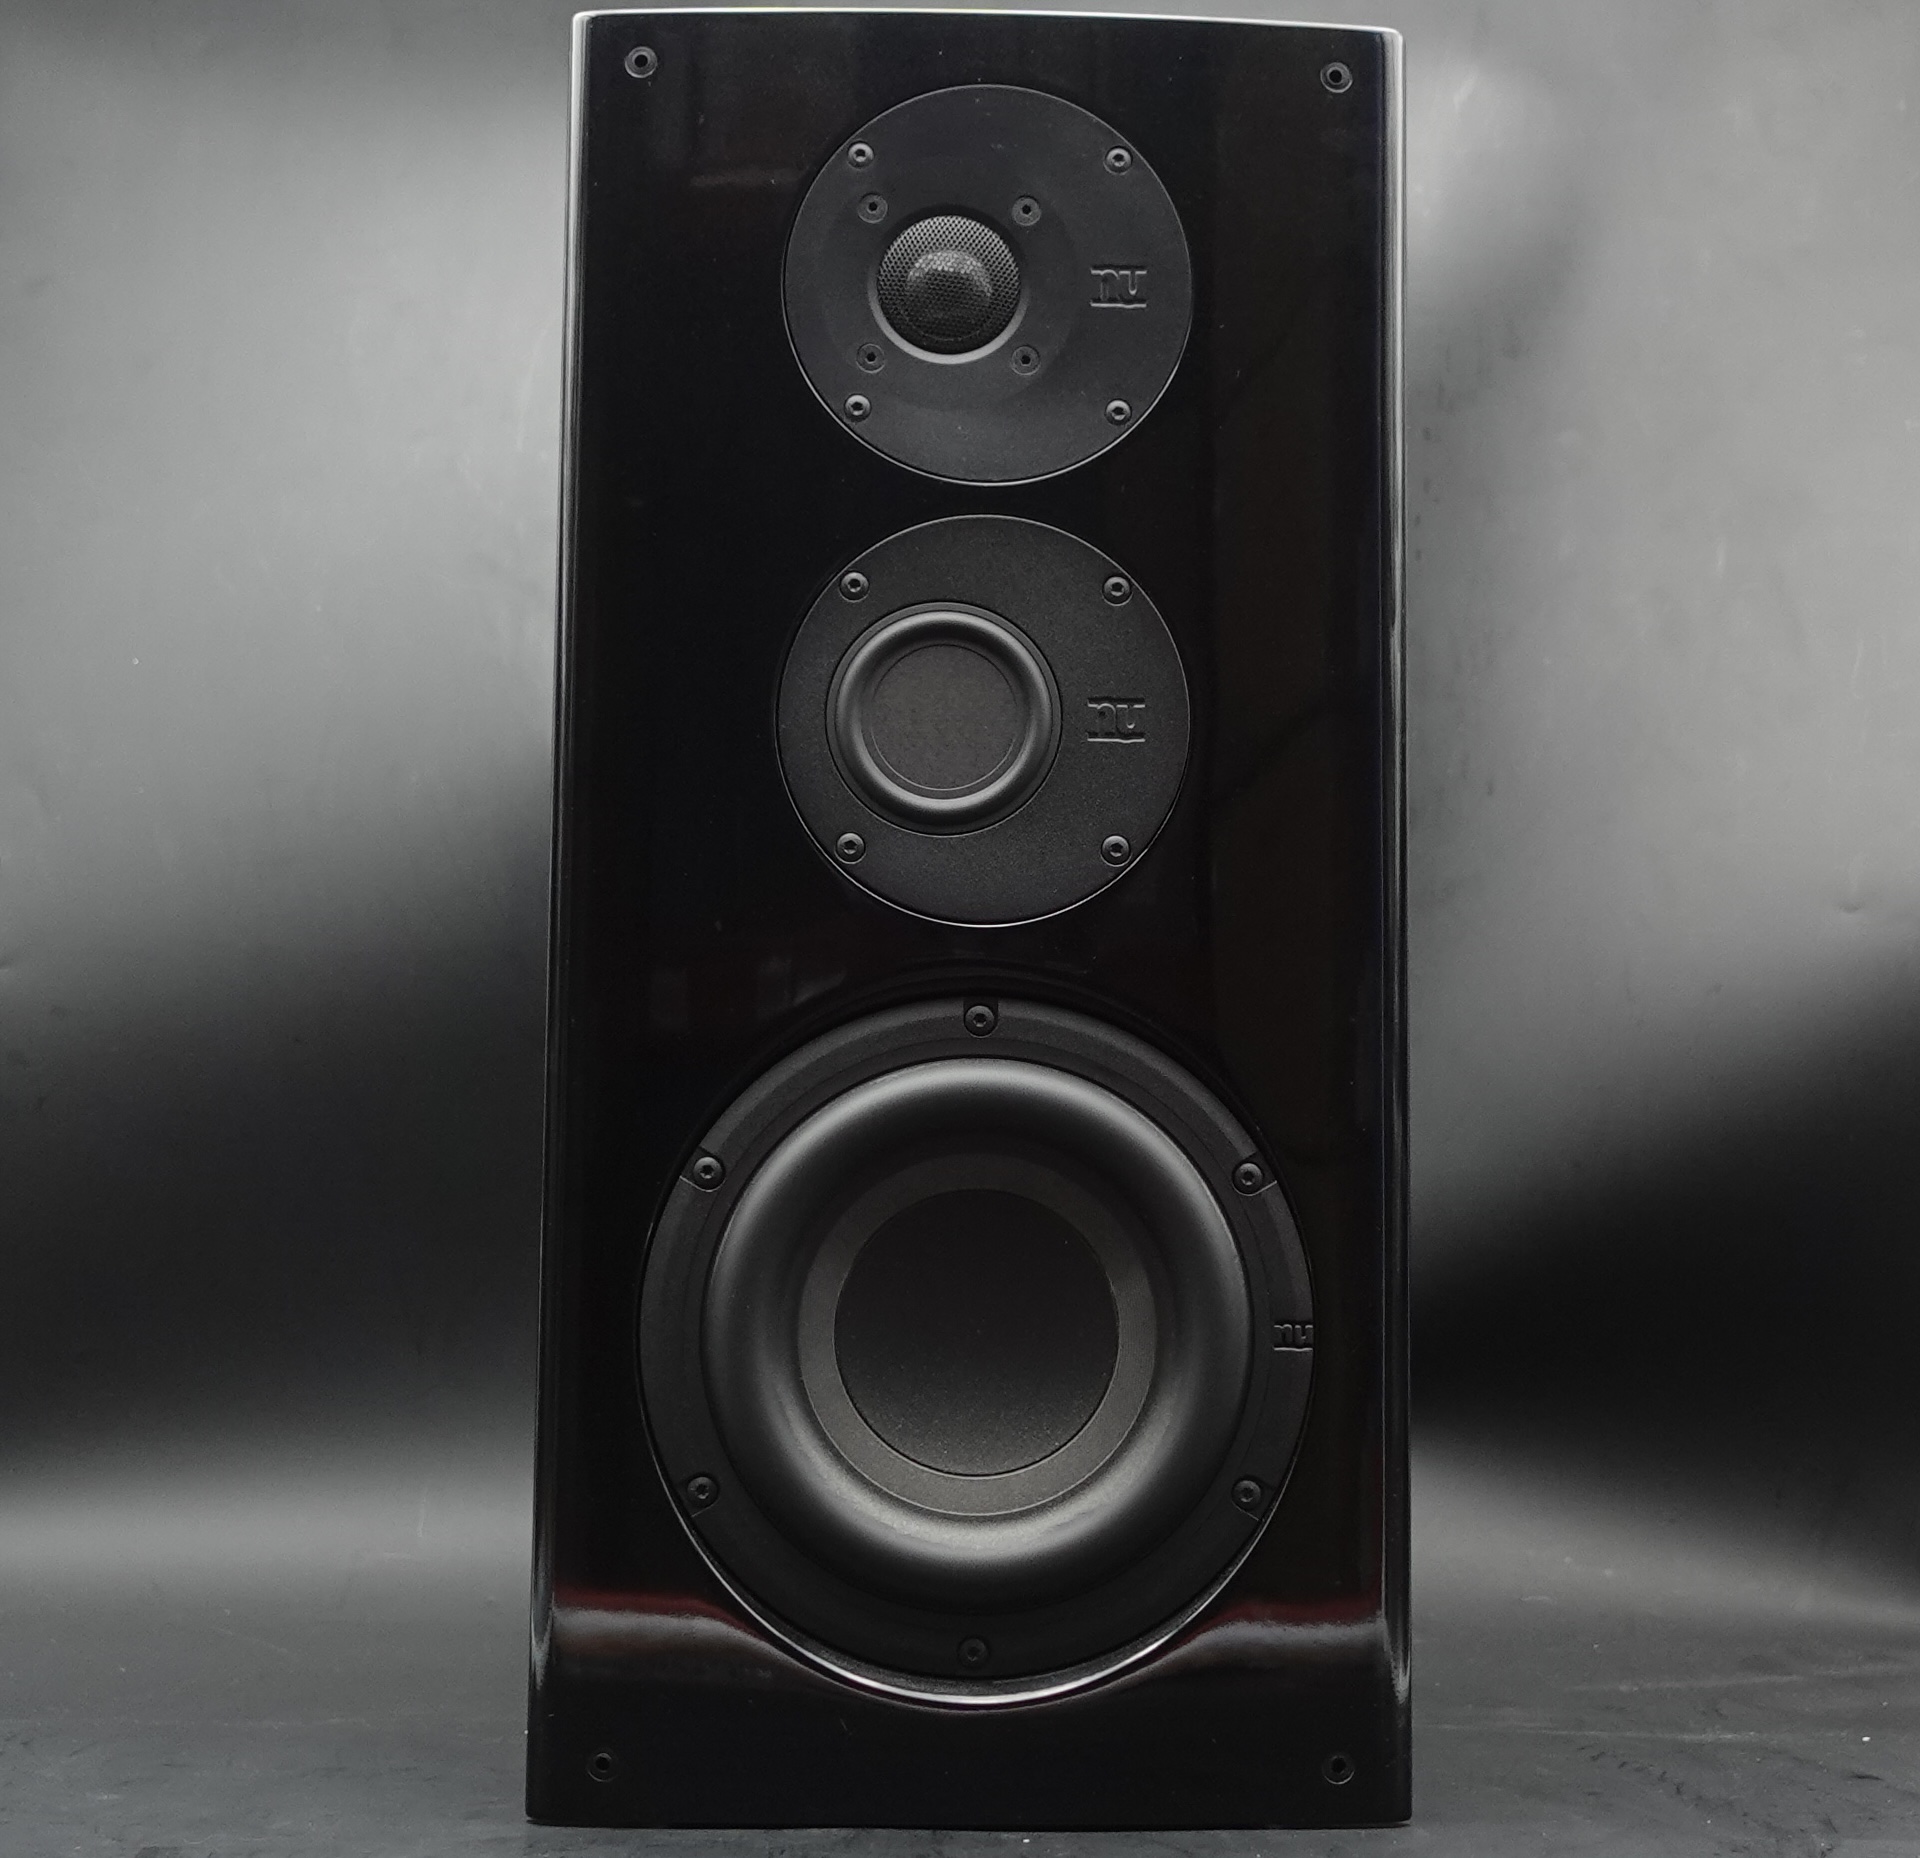 Nubert nuVero 60 compact speaker in black from a customer trade-in